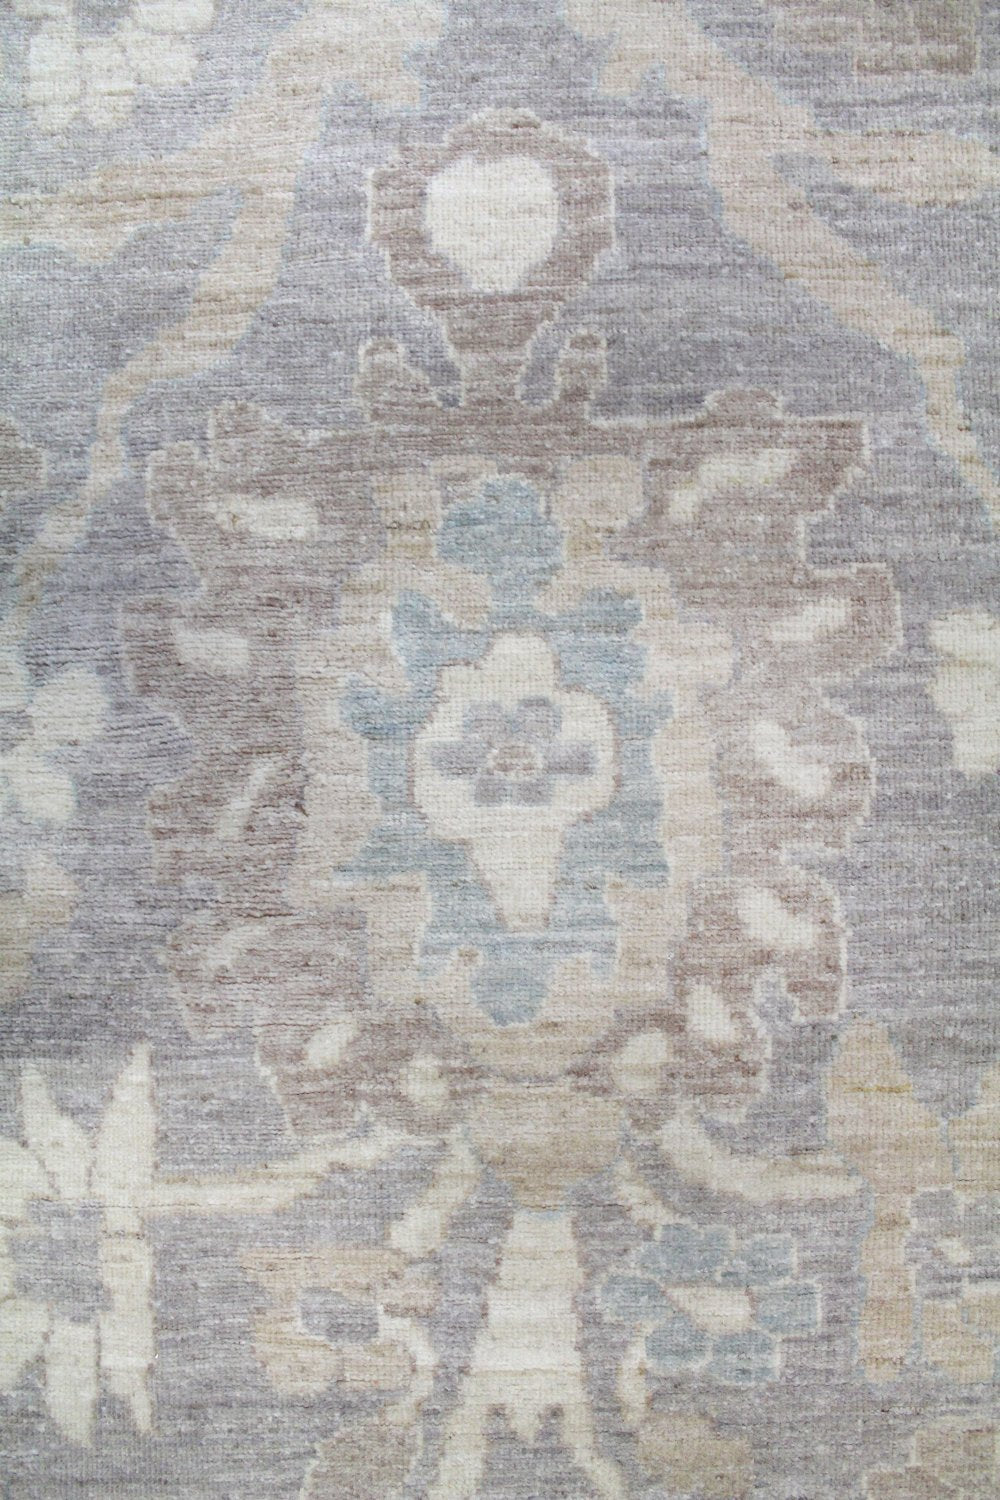 Sultanabad Handwoven Transitional Rug, J61282